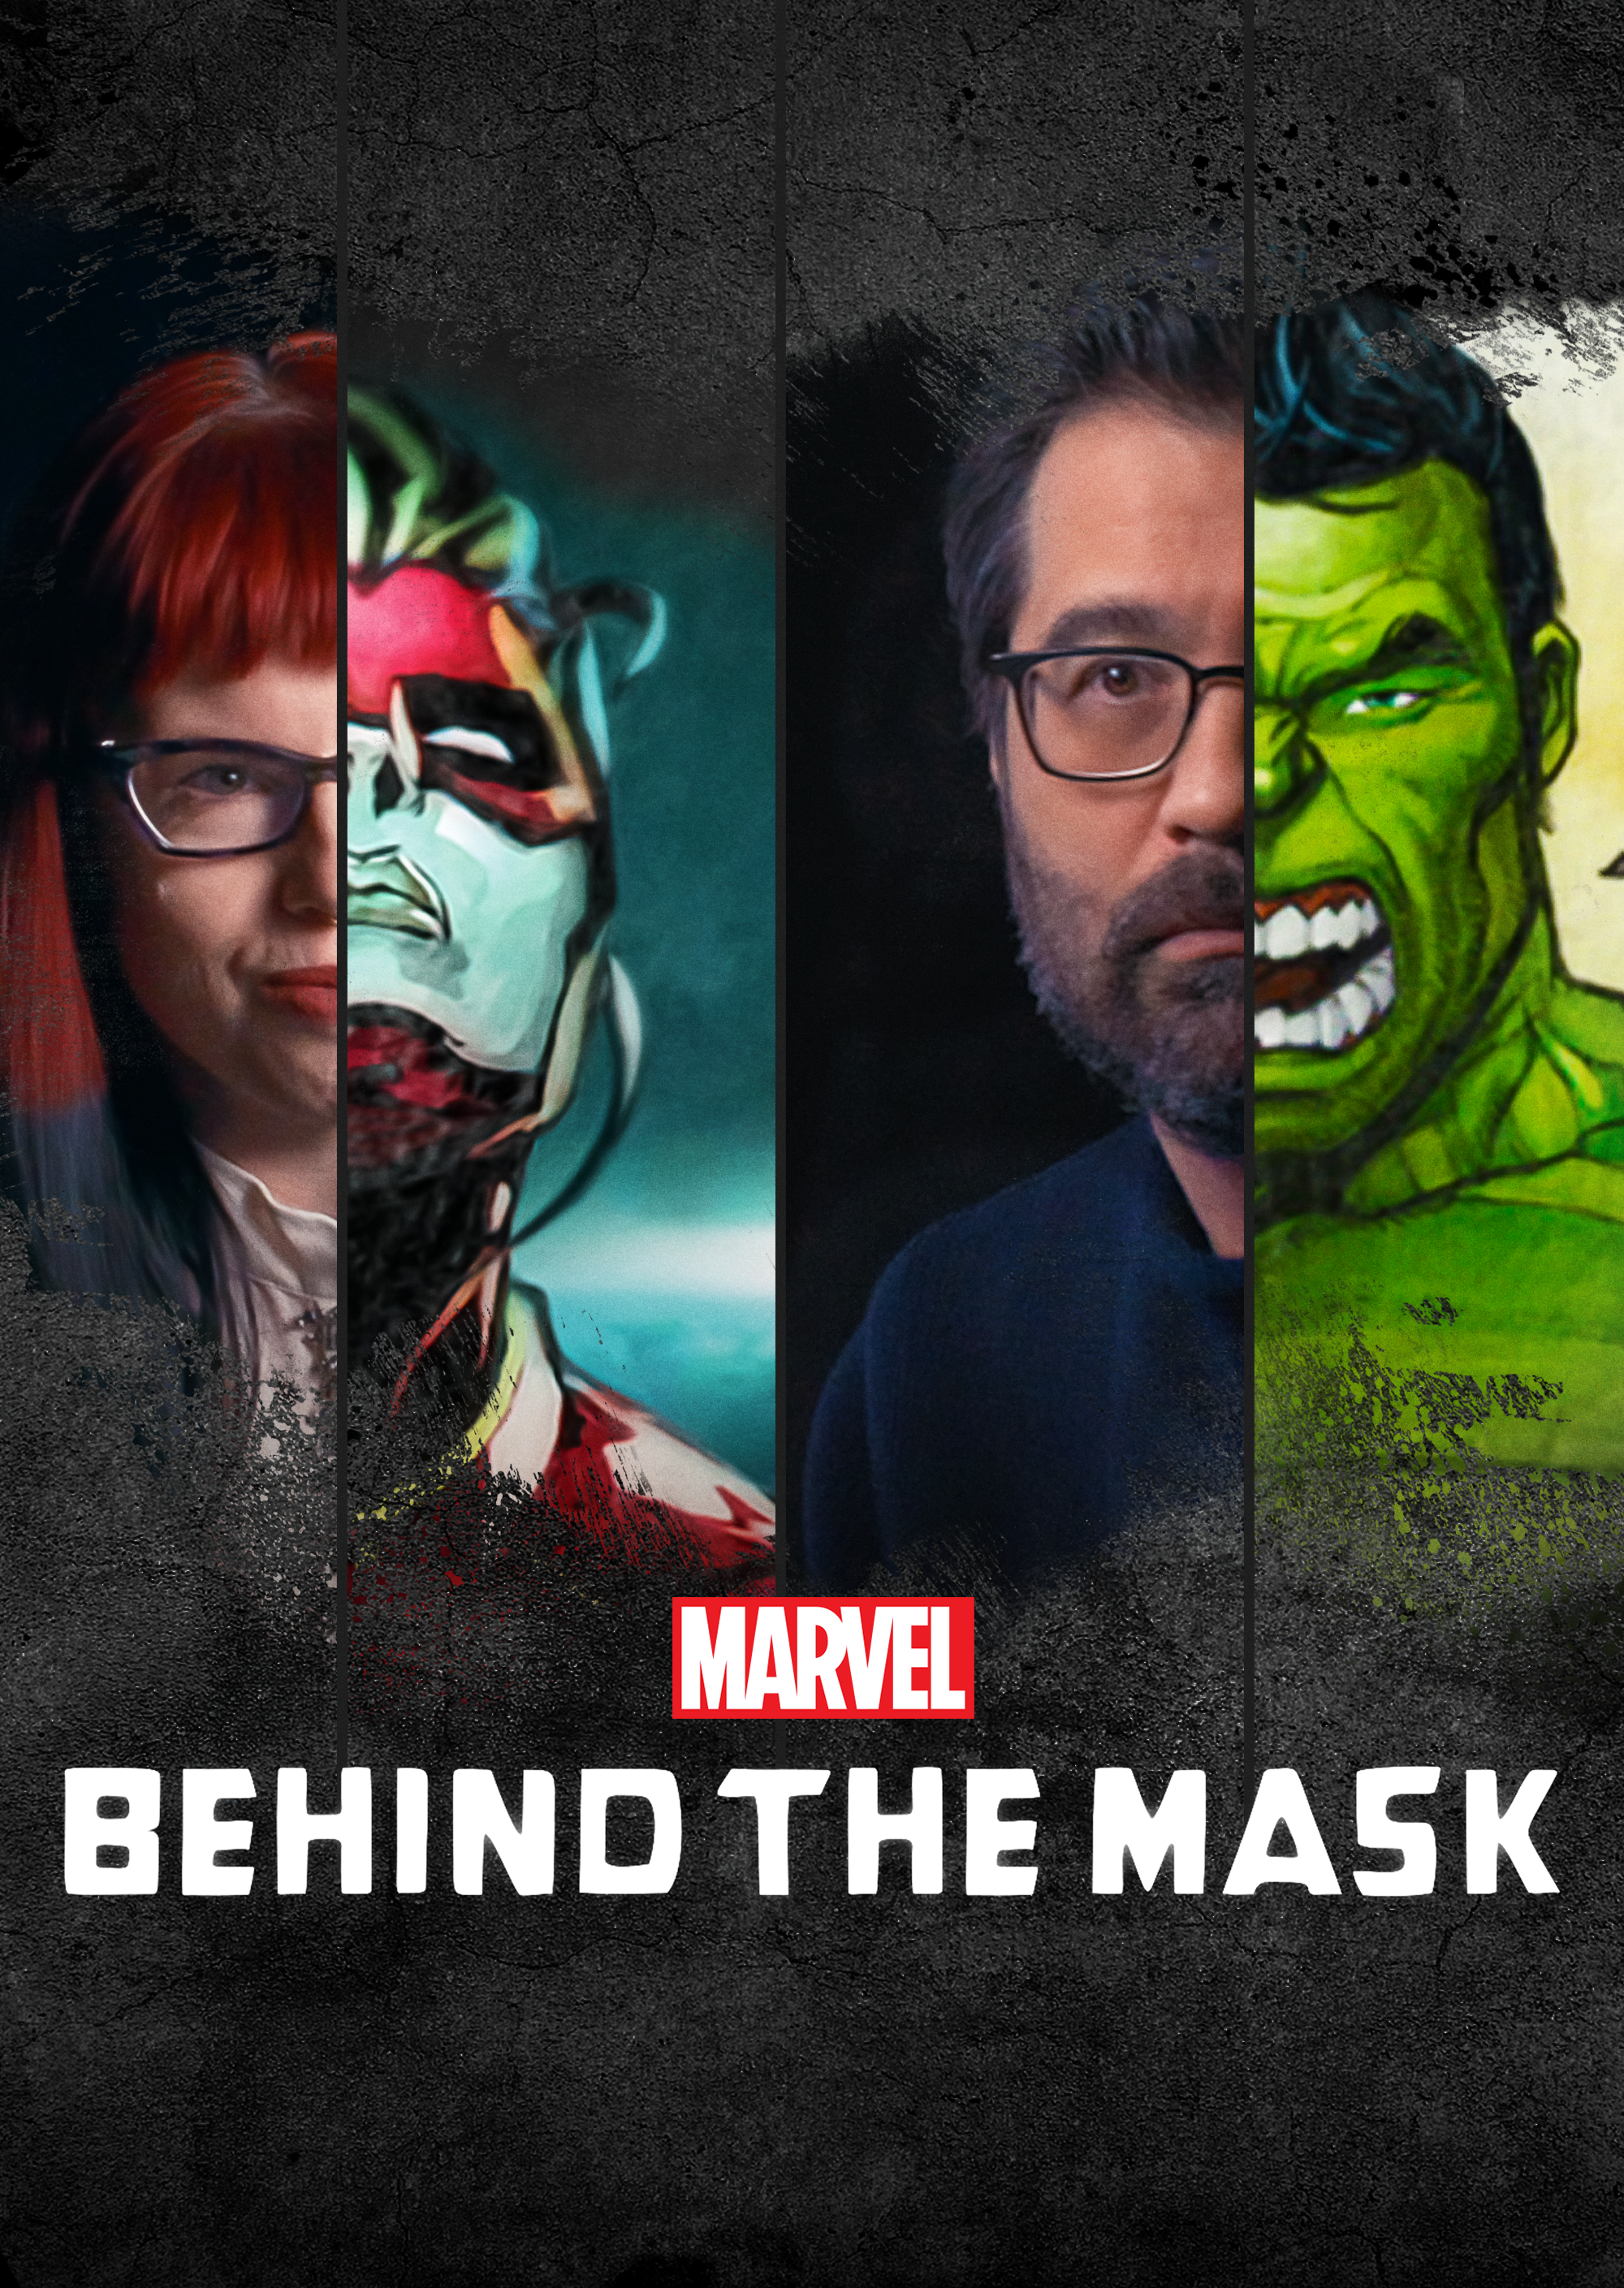 Marvels Behind the Mask 2021